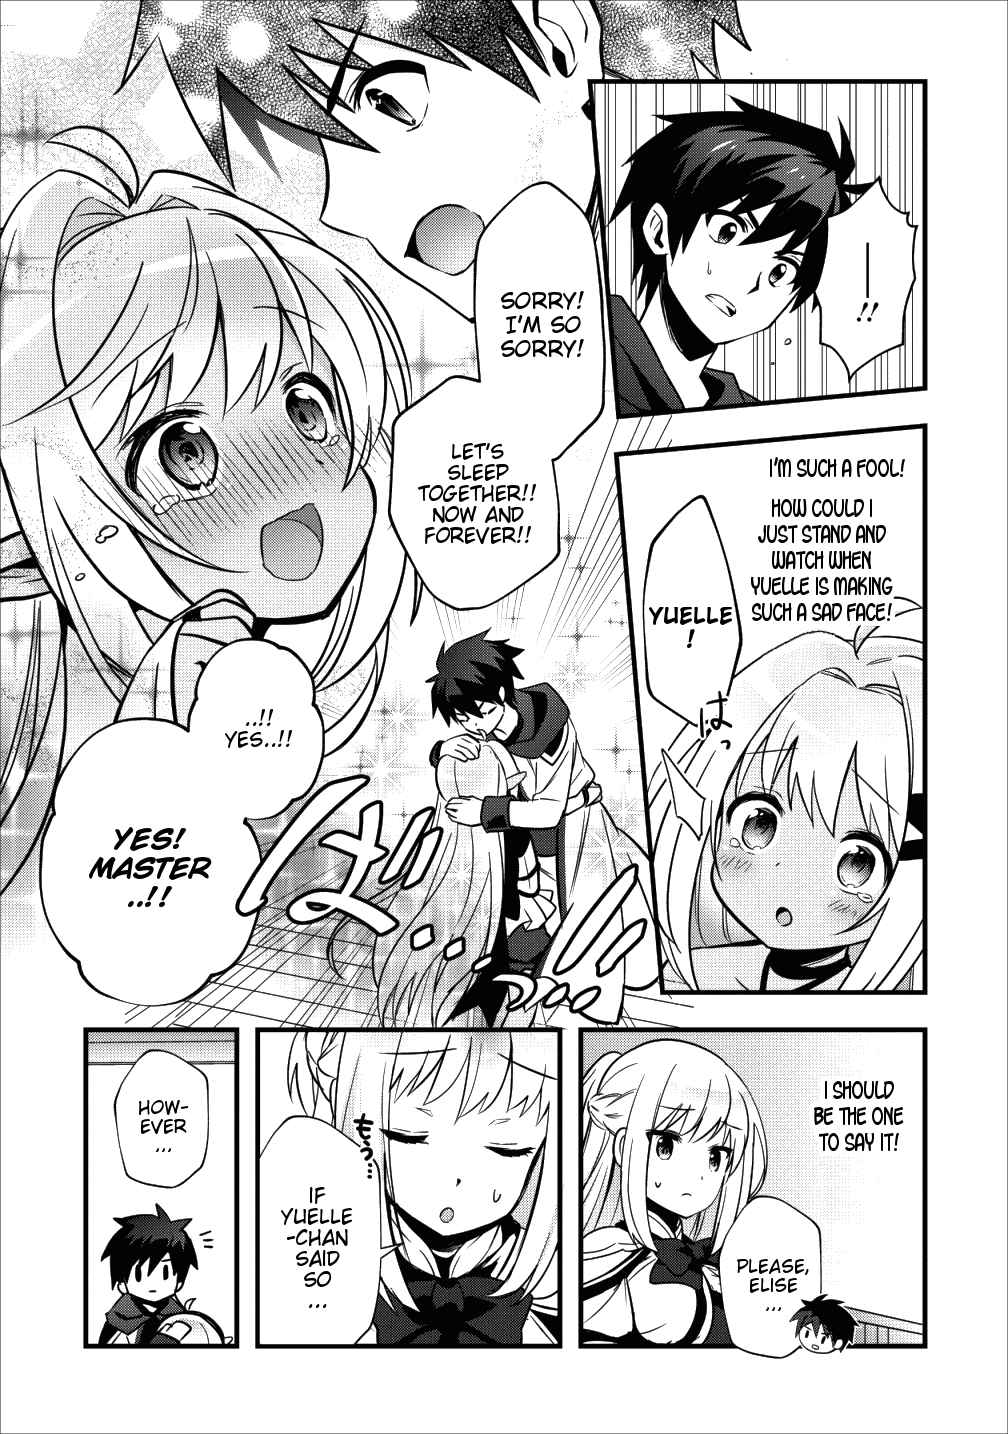 I Work As A Healer In Another World's Labyrinth City Vol. 2 Ch. 7